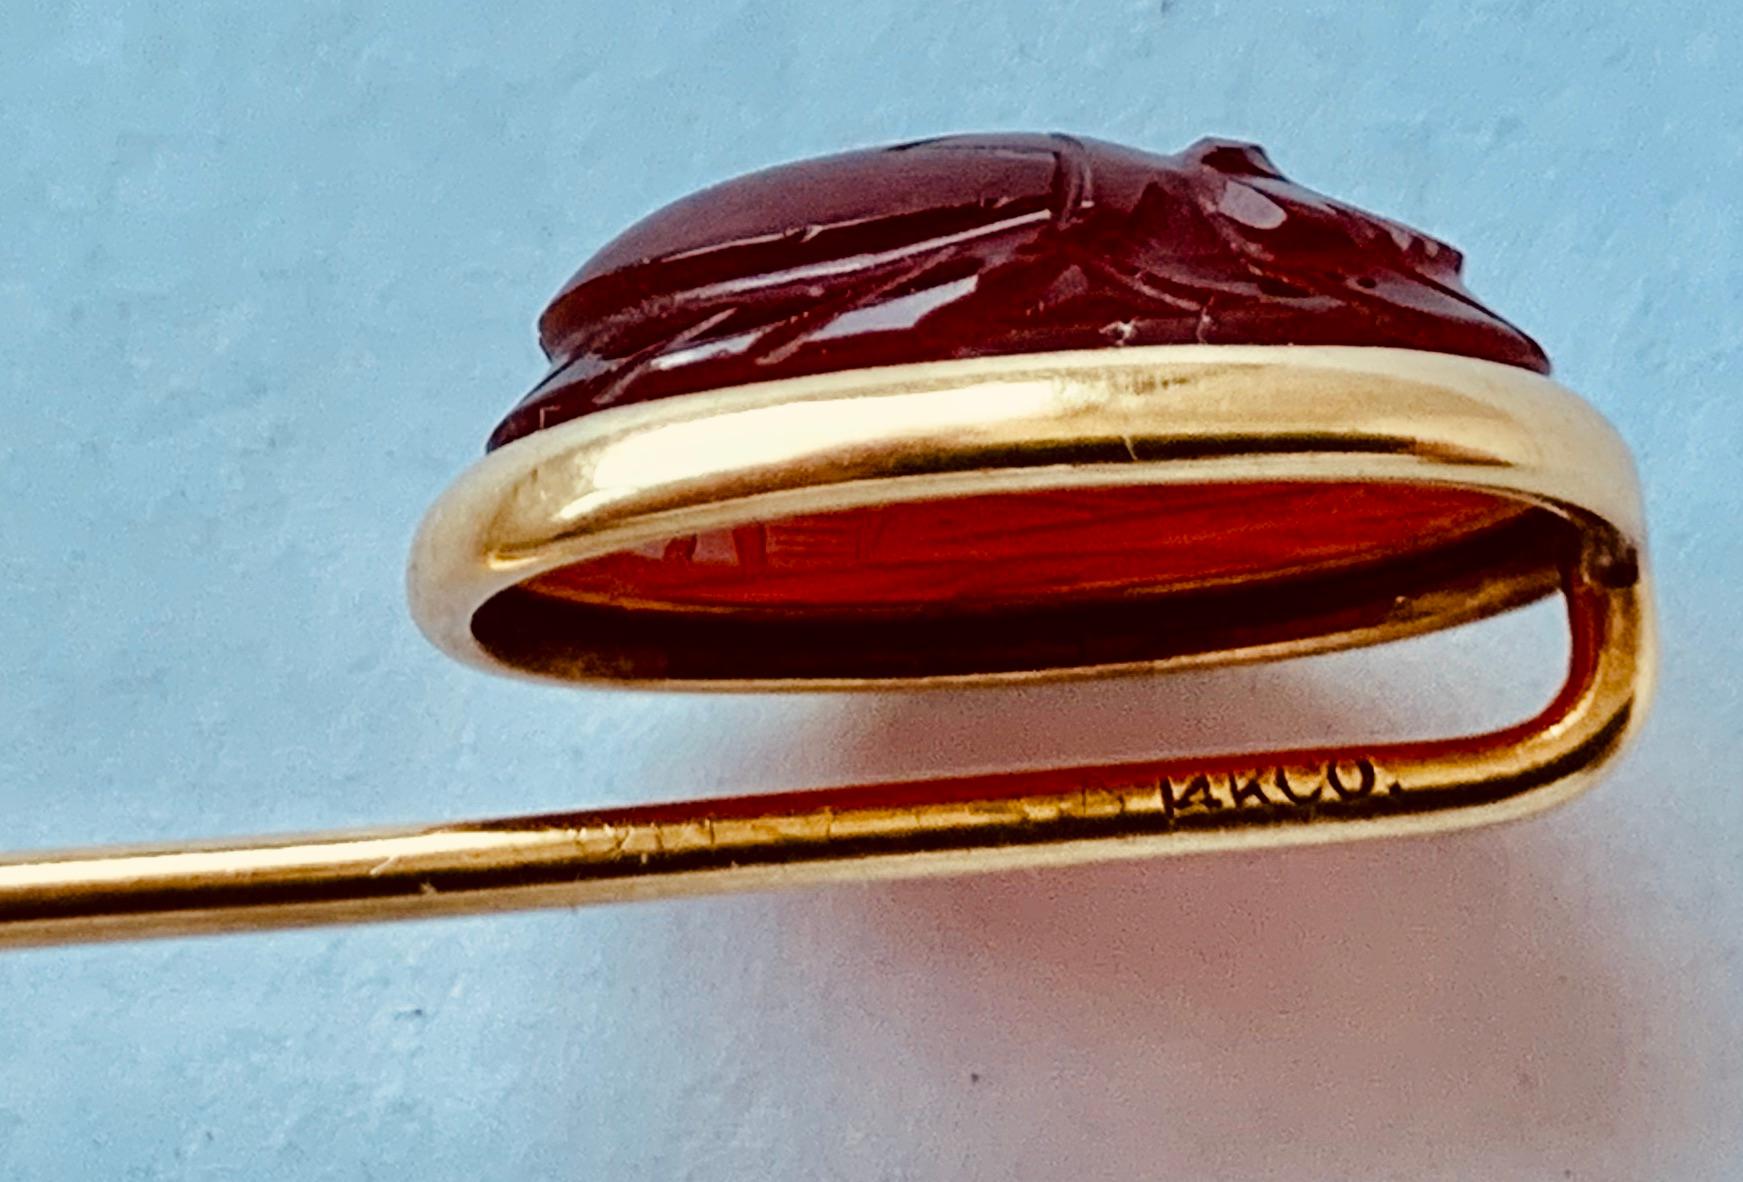 Gentlemen's 14k yellow gold stickpin with an oval cabochon carnelian hand carved to resemble an Egyptian scarab.  If you don't wear it on your tie it will look great on the lapel of your jacket.  I have also seen them worn on hats and berets.  Fully